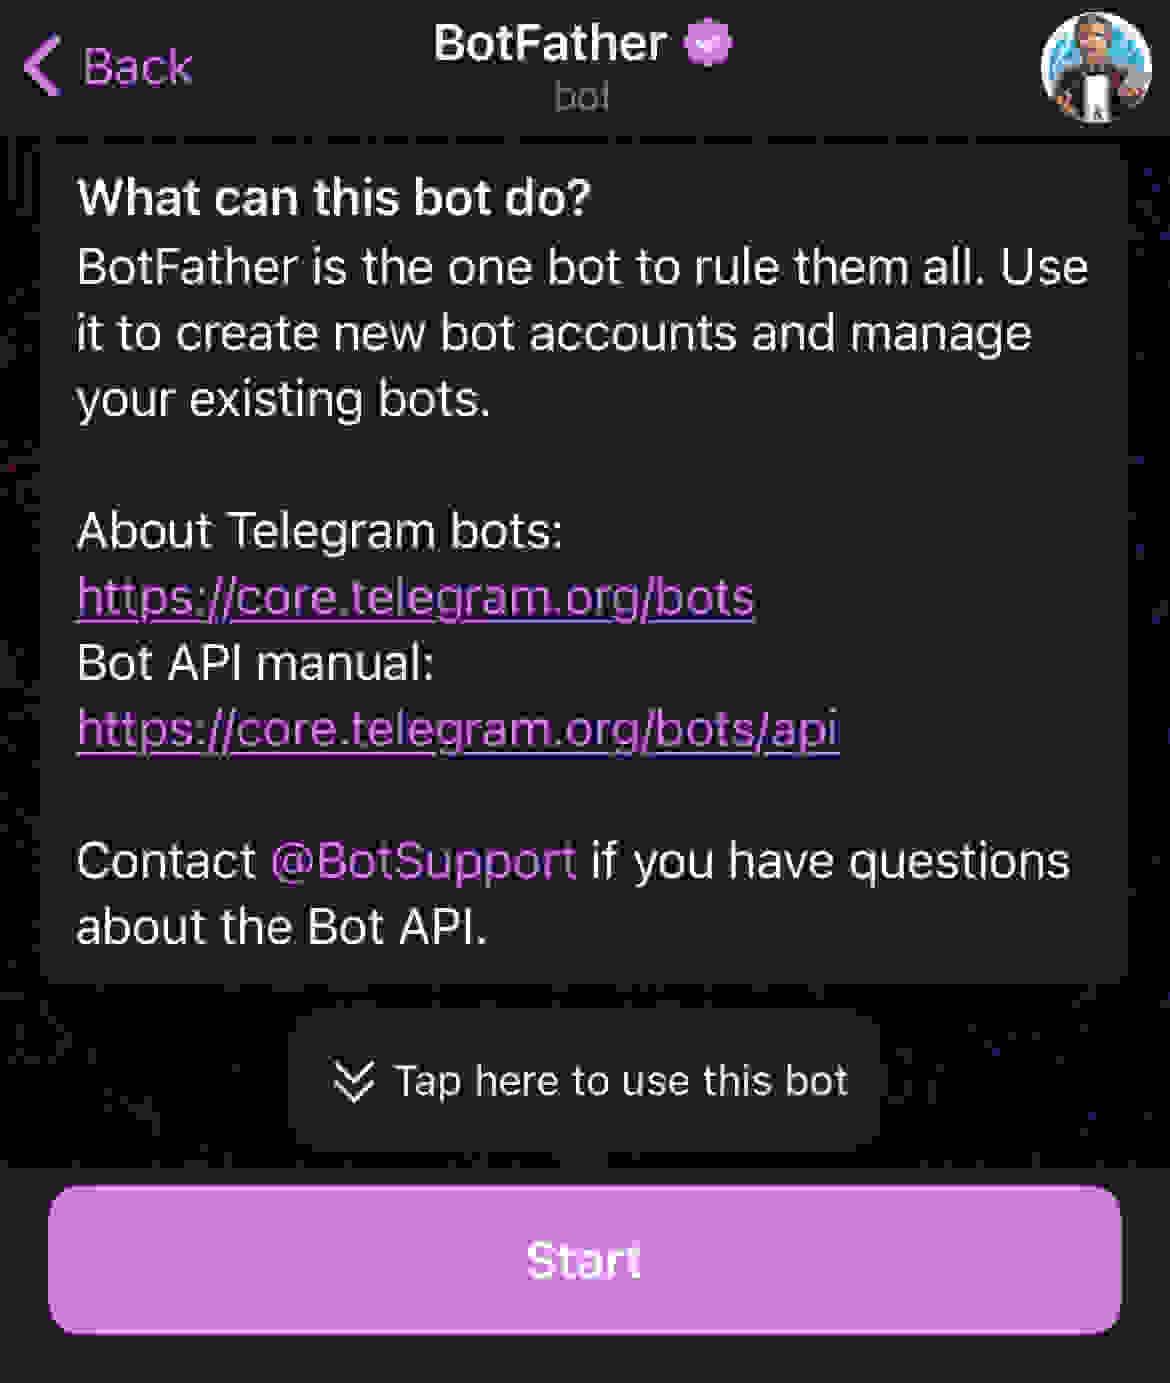 Once selected, we'll need to perform the following operations. If it's the first time accessing the bot, click on the Start CTA.